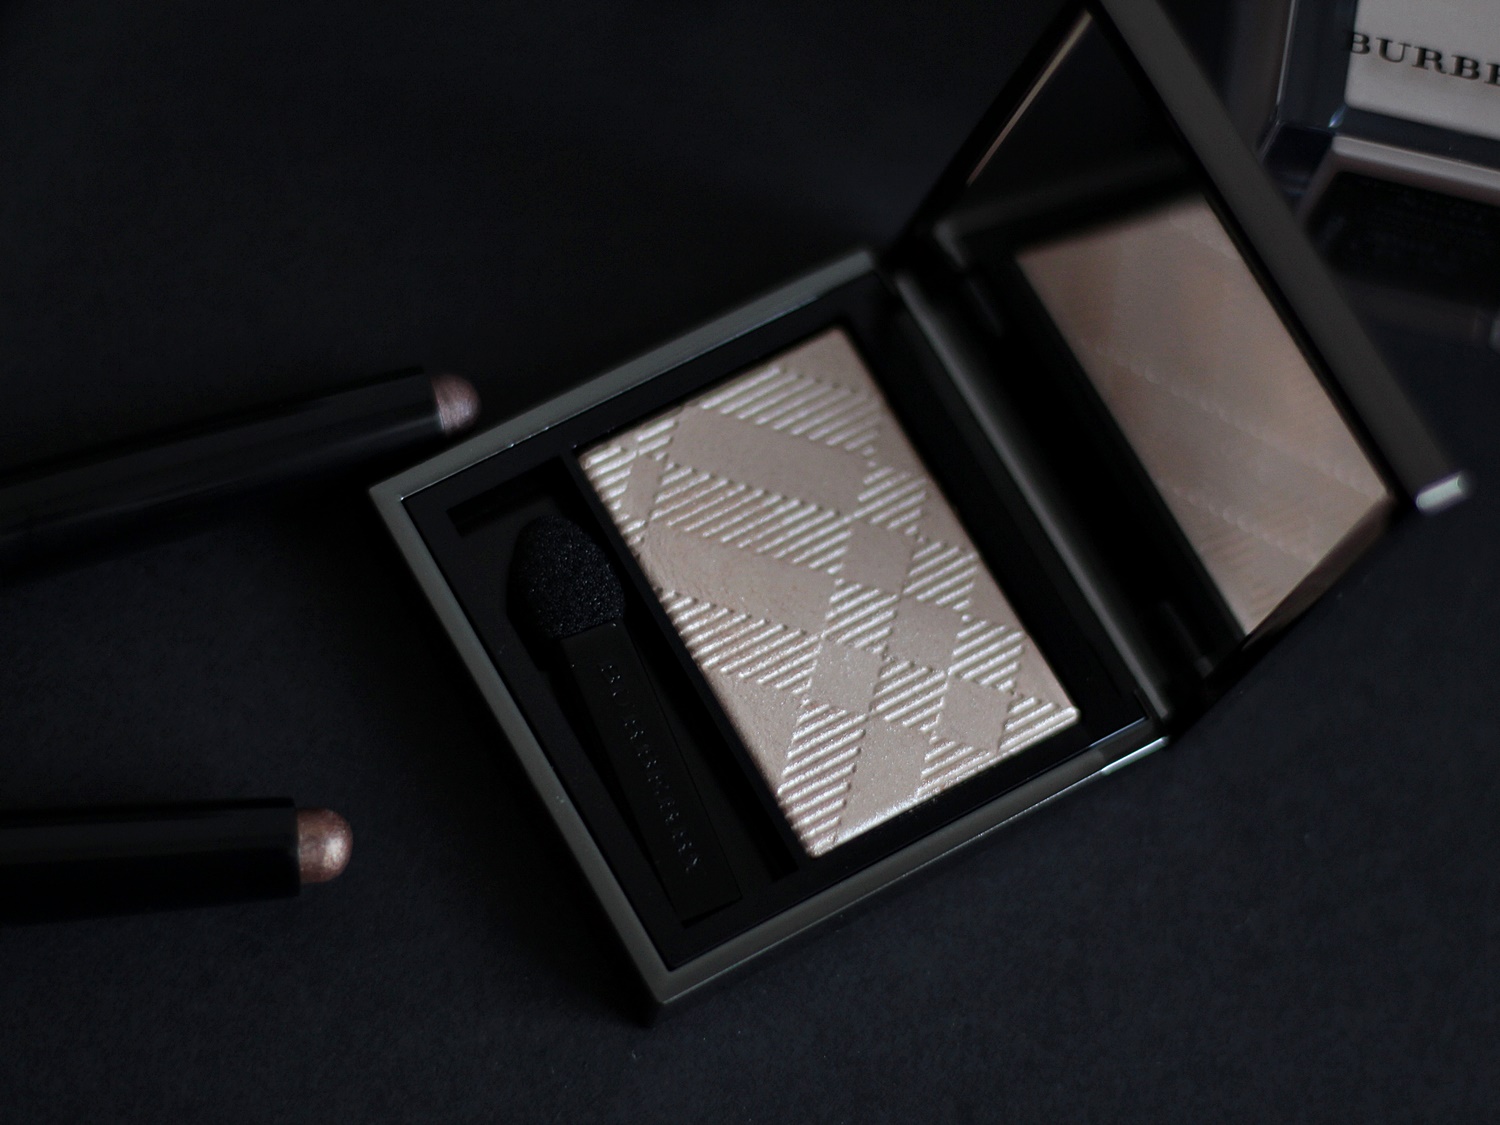 burberry-wet-dry-glow-shadow-gold-pearl